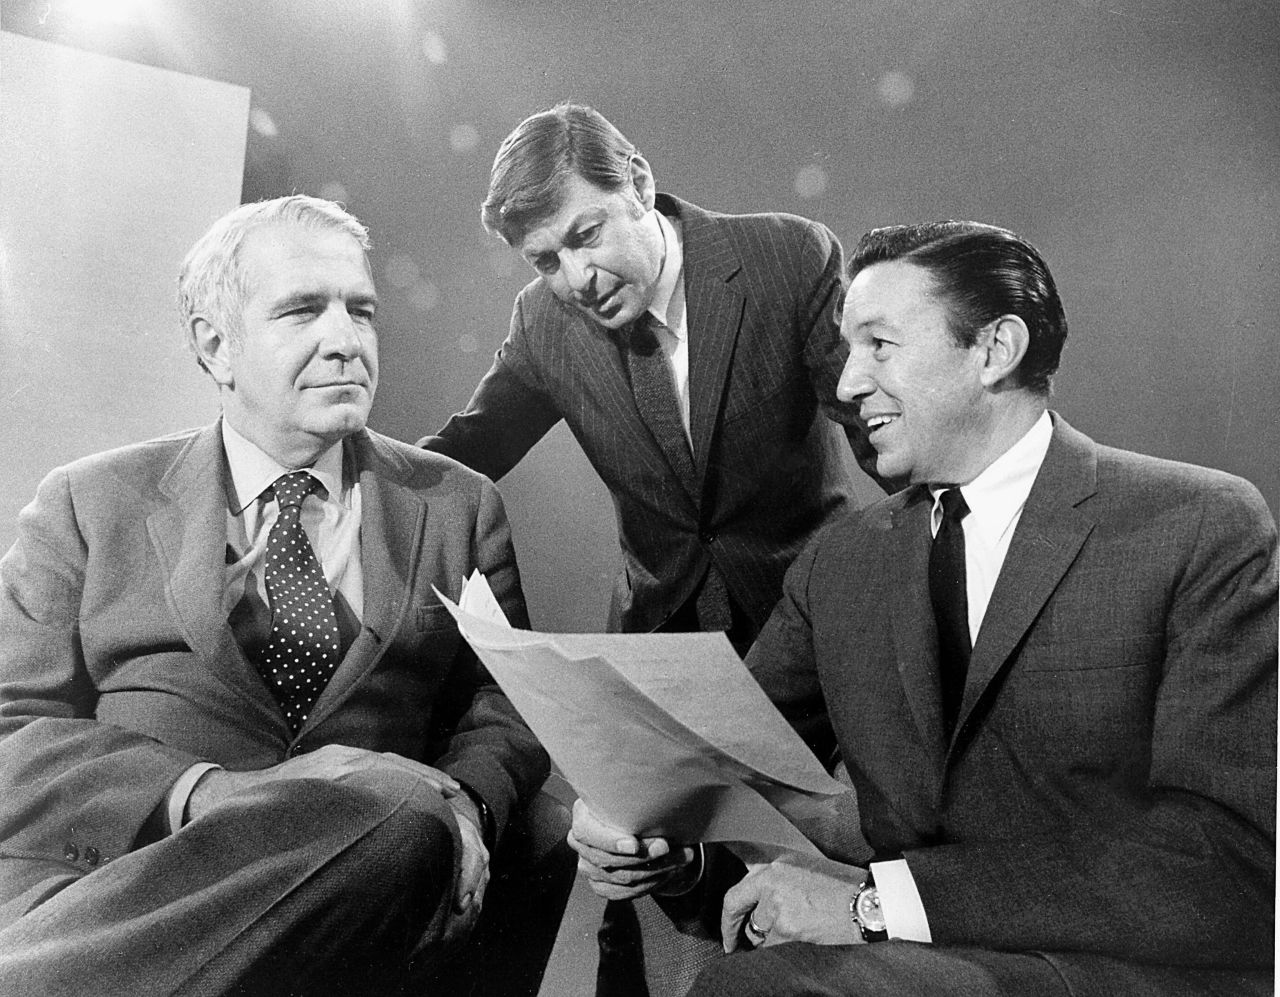 The iconic Sunday night news magazine "60 Minutes" premiered September 24, 1968, with Harry Reasoner, left, and Mike Wallace, right. At the center is Don Hewitt, the show's creator and producer.